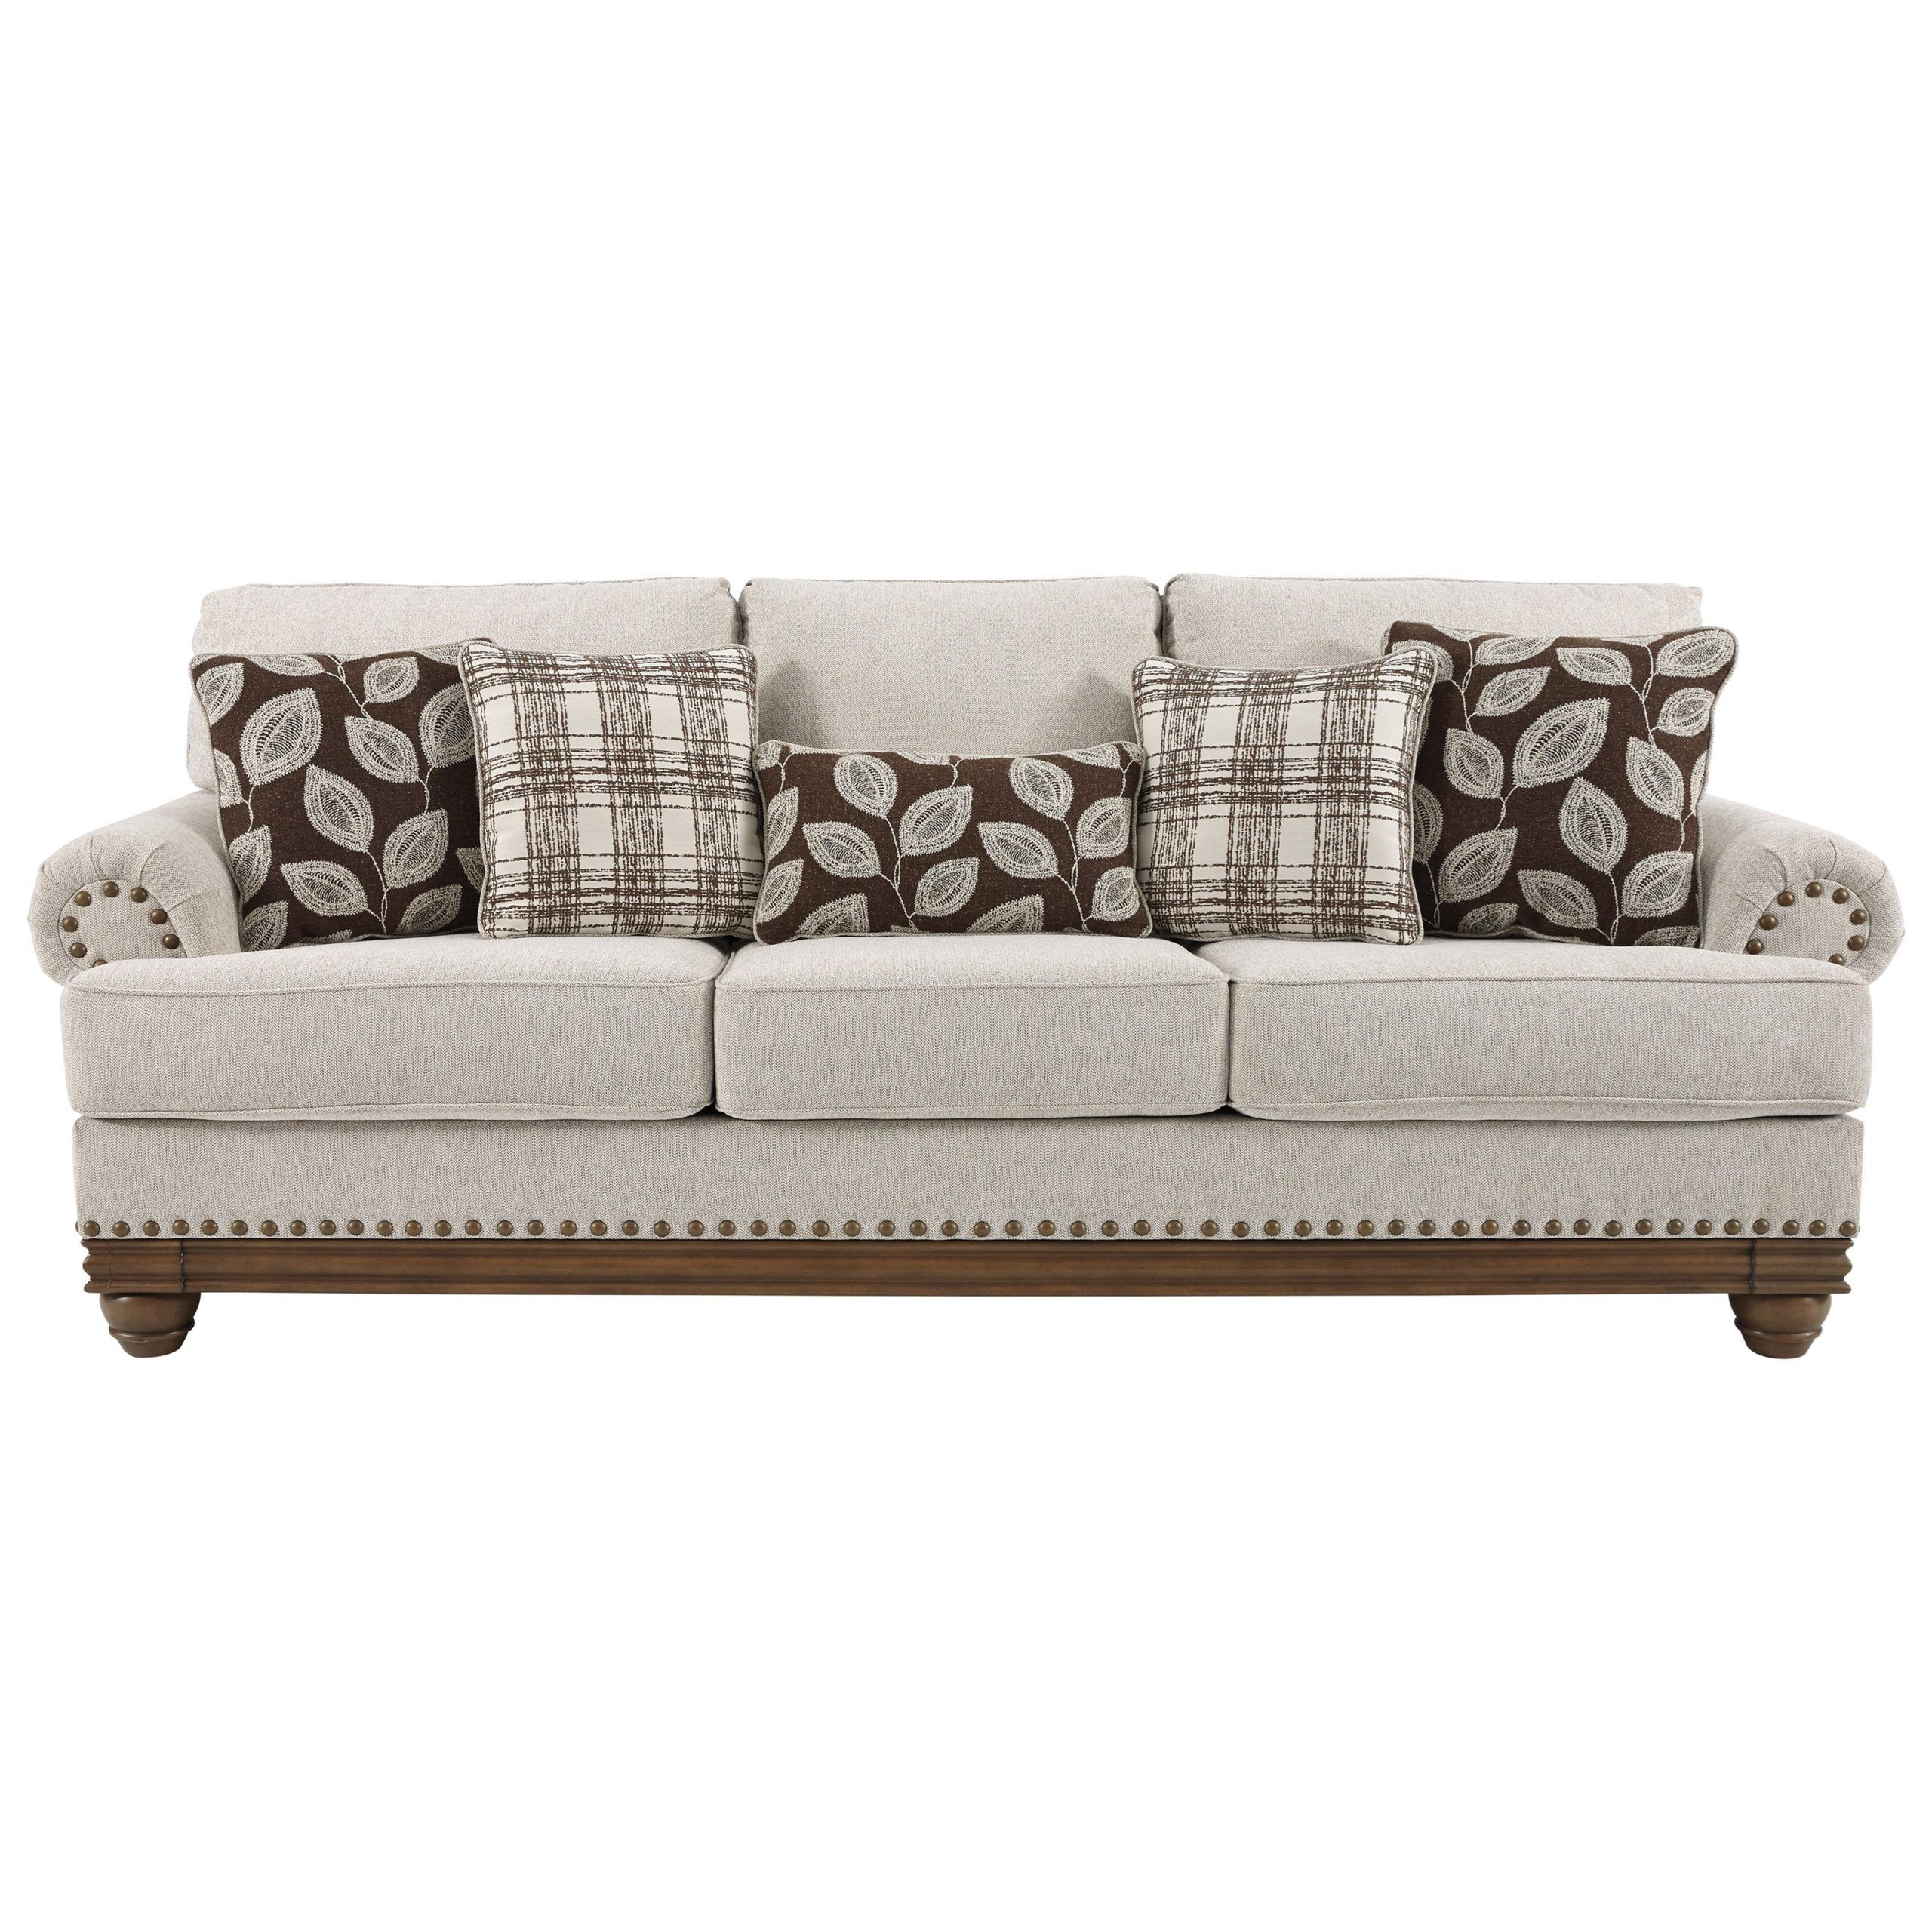 Signature Designashley Harleson 117901 Transitional Sofa With Nailhead  Trim | Factory Direct Furniture | Uph – Stationary Sofas Intended For Sofas With Nailhead Trim (Photo 3 of 15)